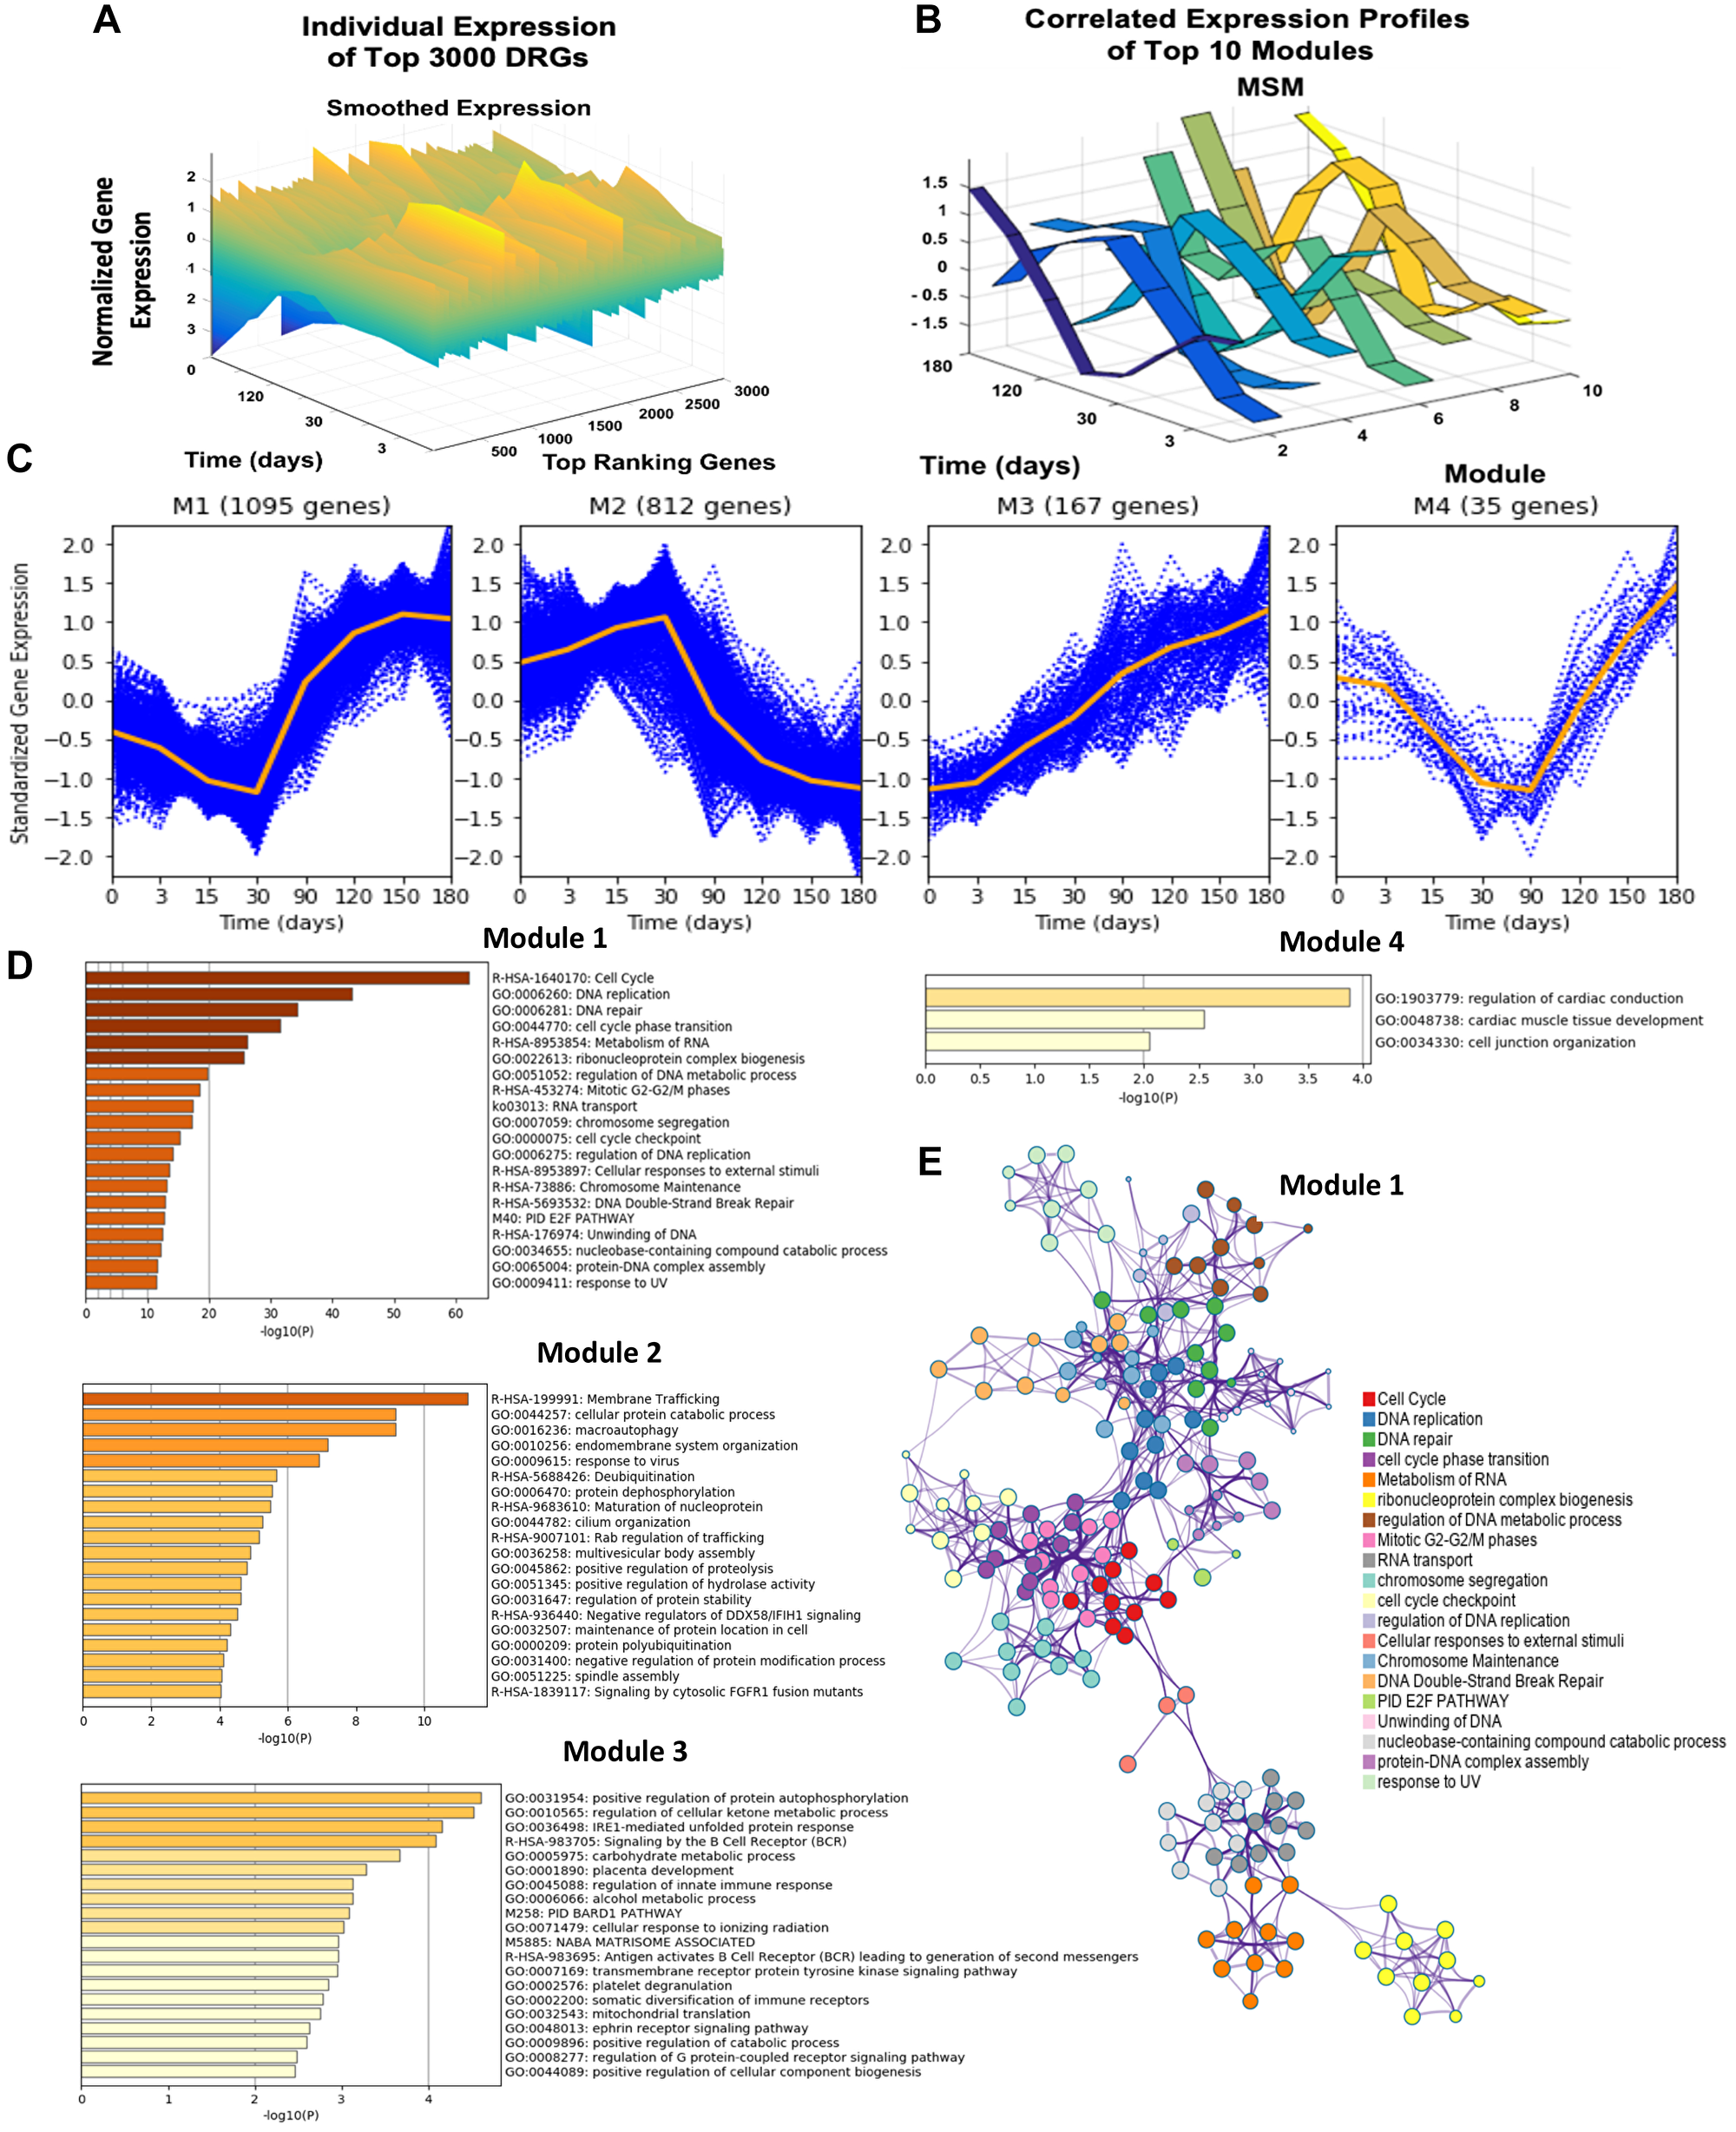 Dynamic gene expression analysis results, gene expression trends of top four modules, and network analysis of the top four modules DRGs using Metascape.